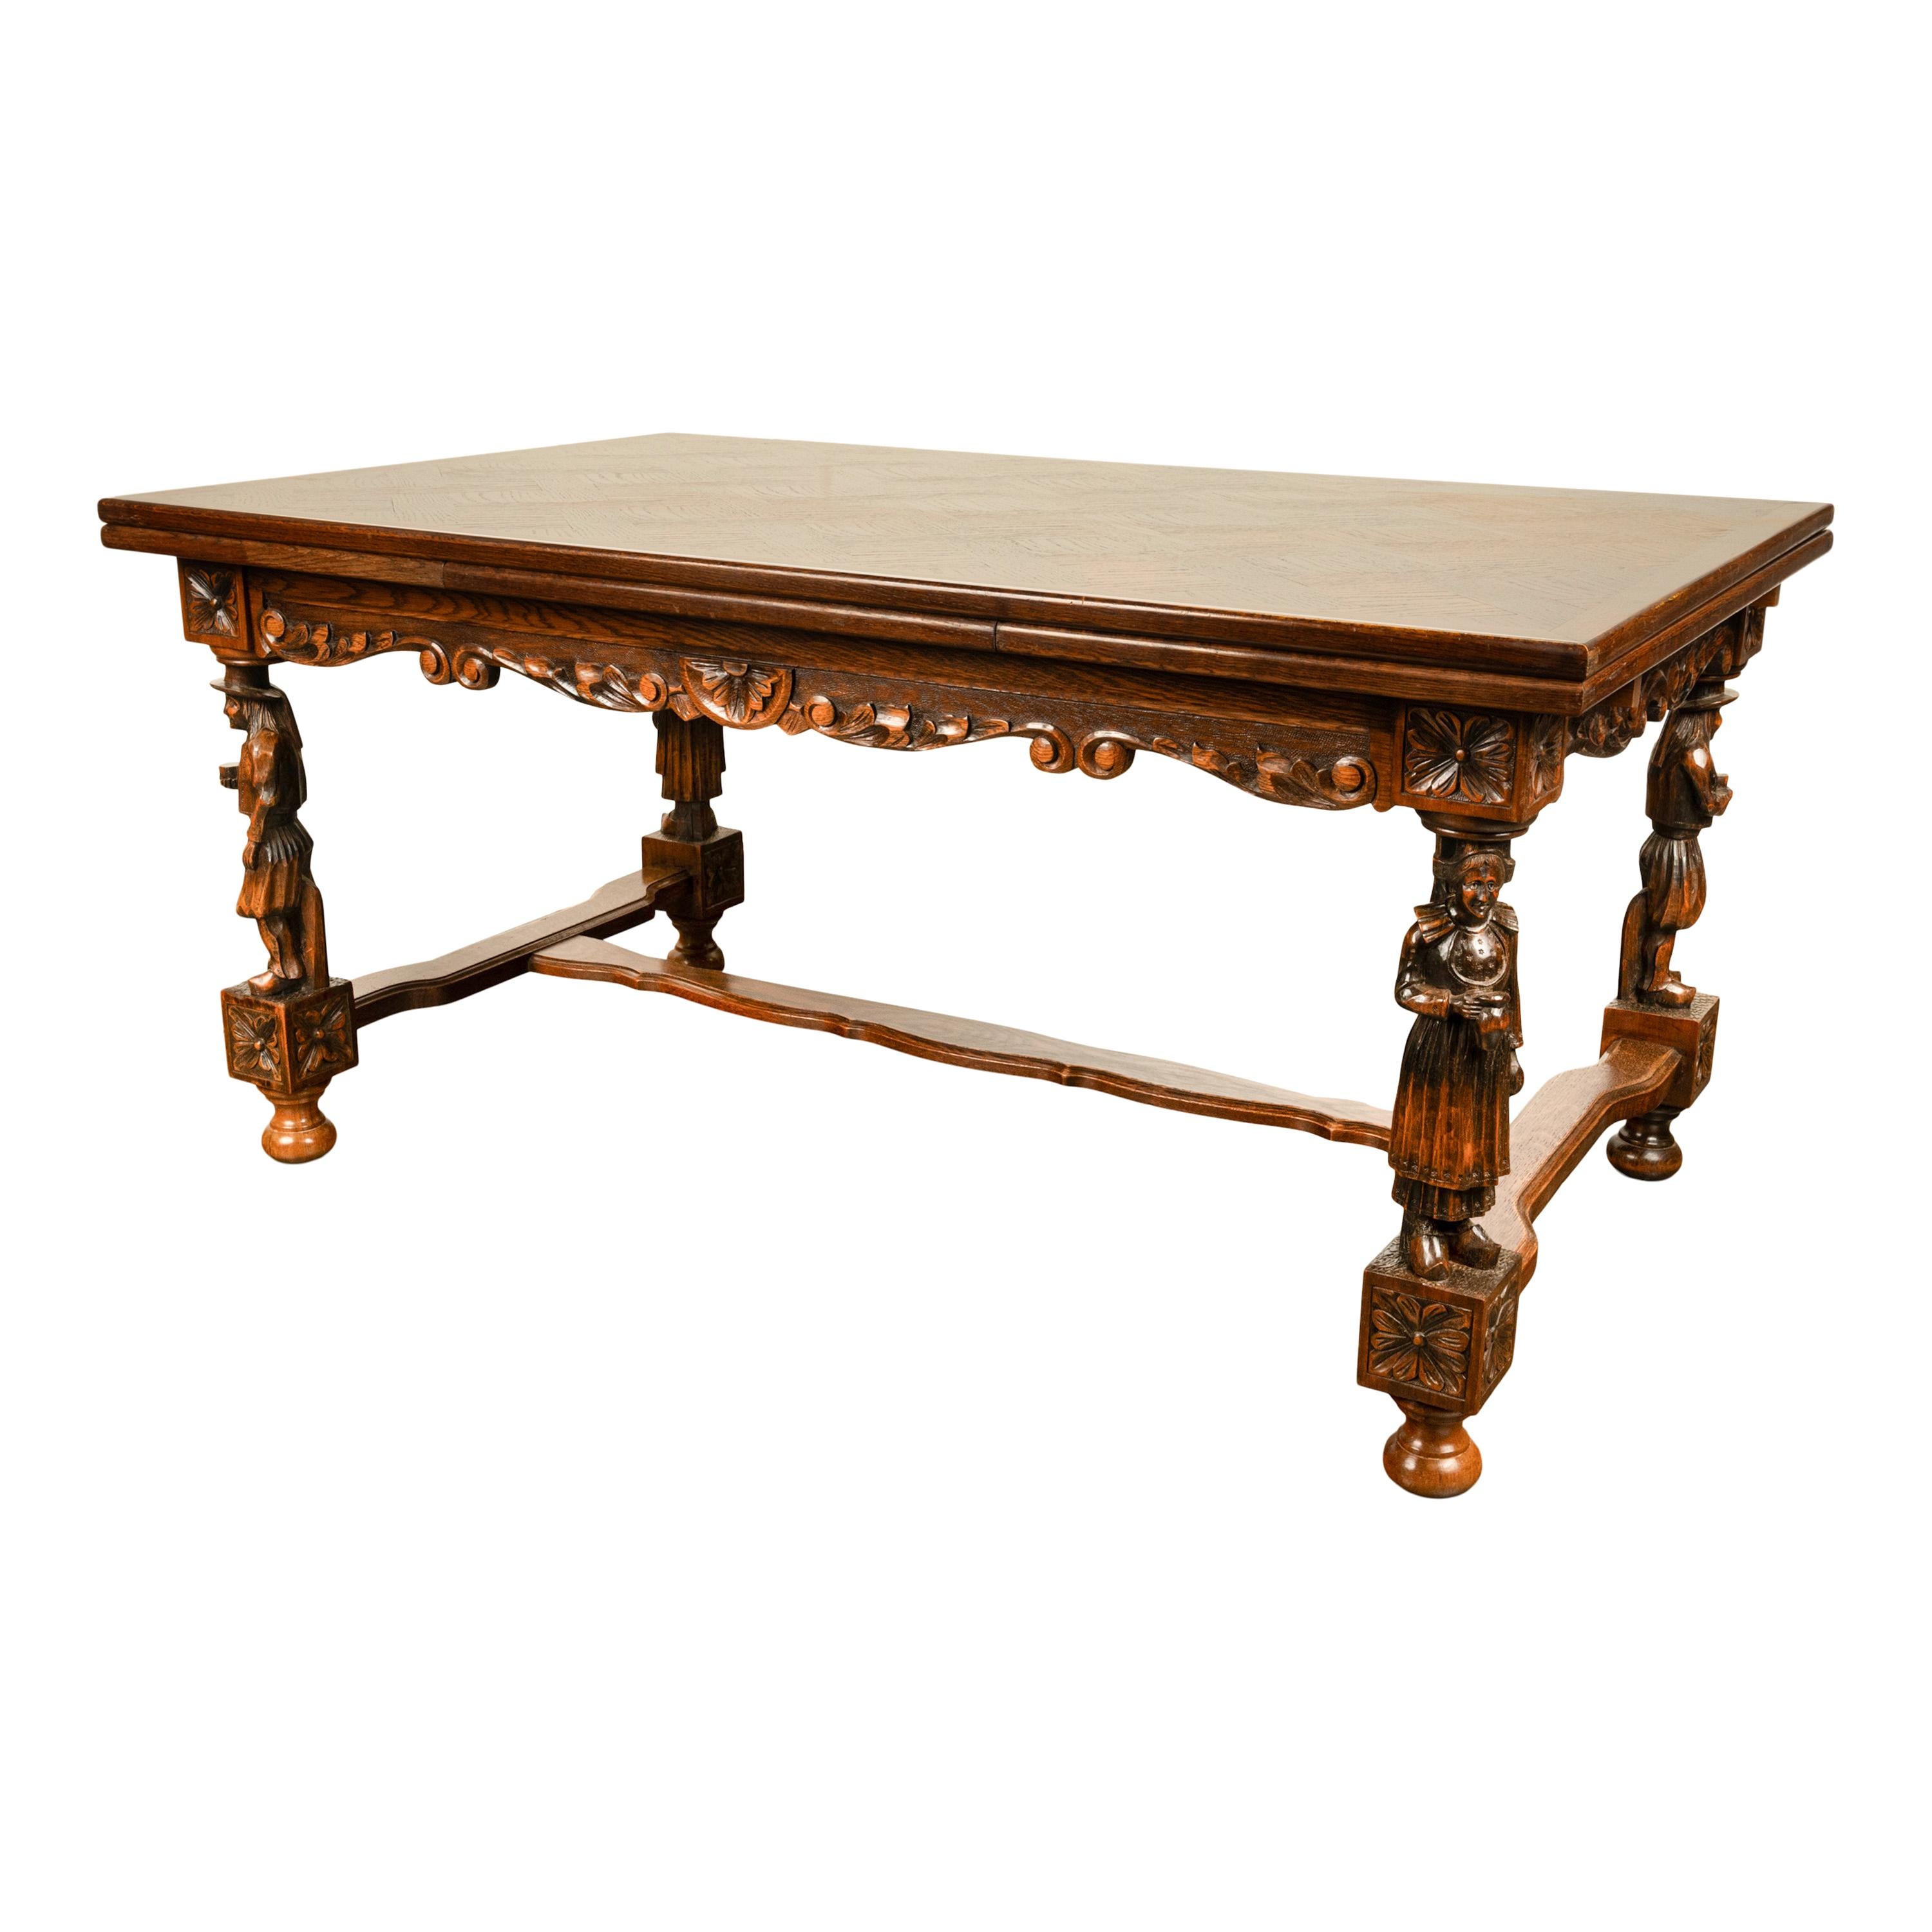 Antique Carved Figural French Breton Inlaid Dining Extending Table Brittany 1900 In Good Condition For Sale In Portland, OR